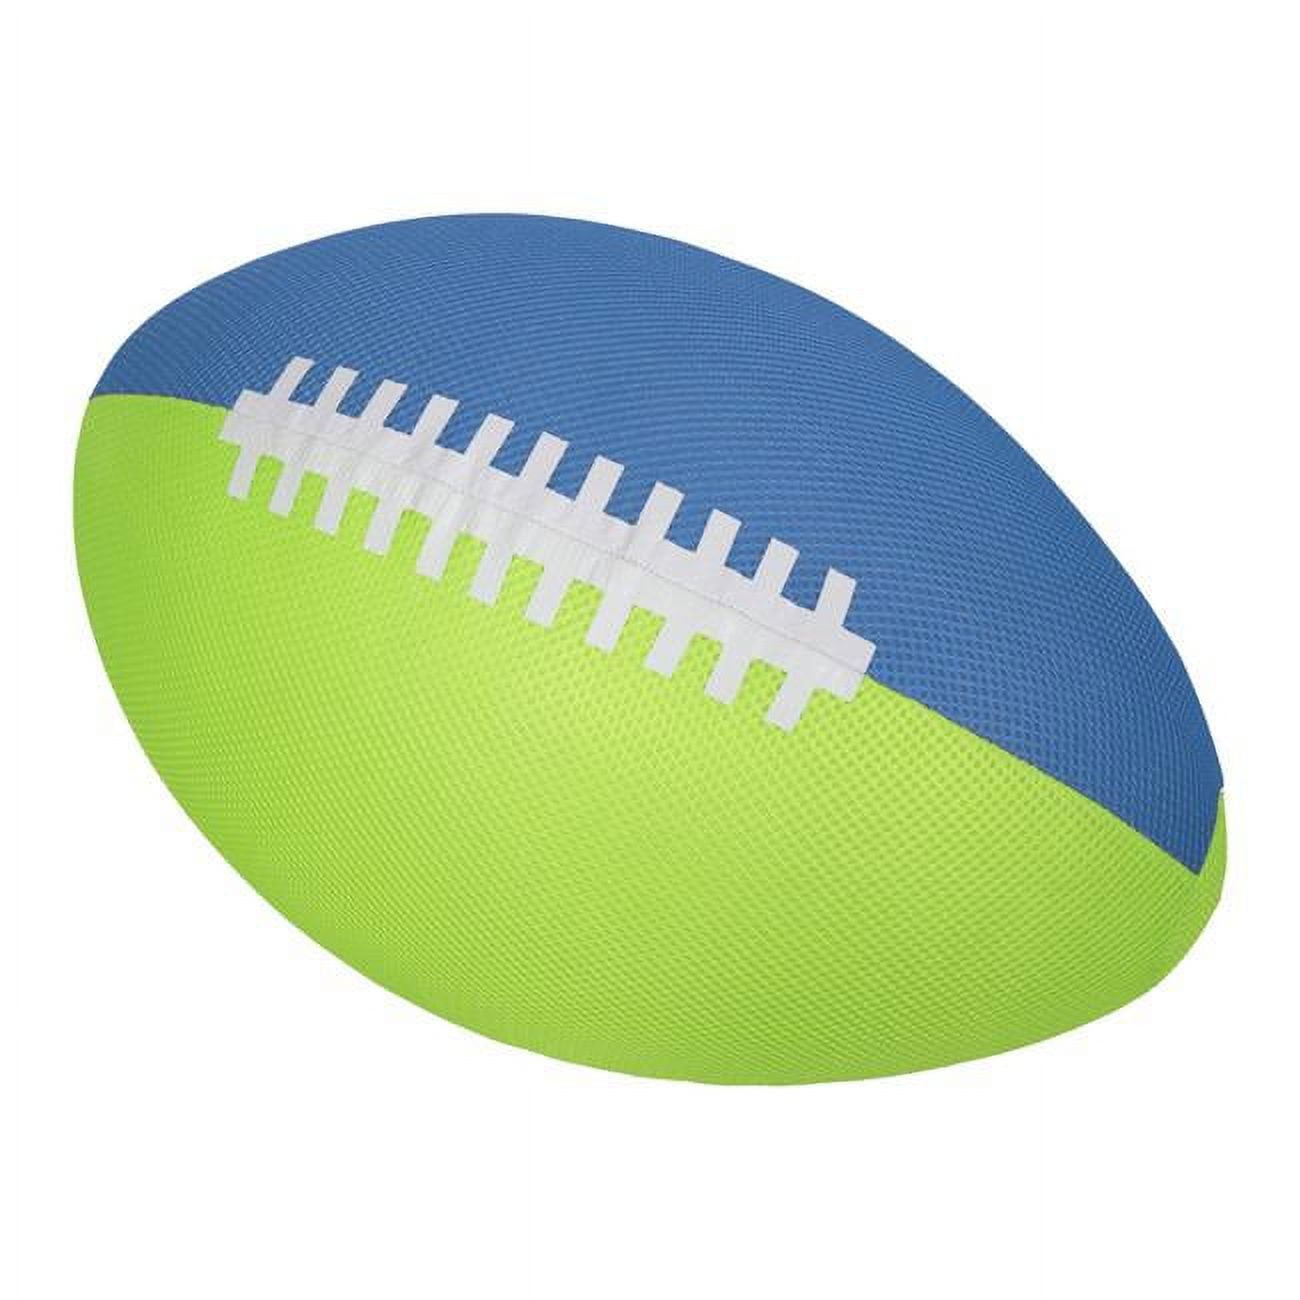 Picture of Hedstrom 8048746 Wowza Football, Assorted Colors